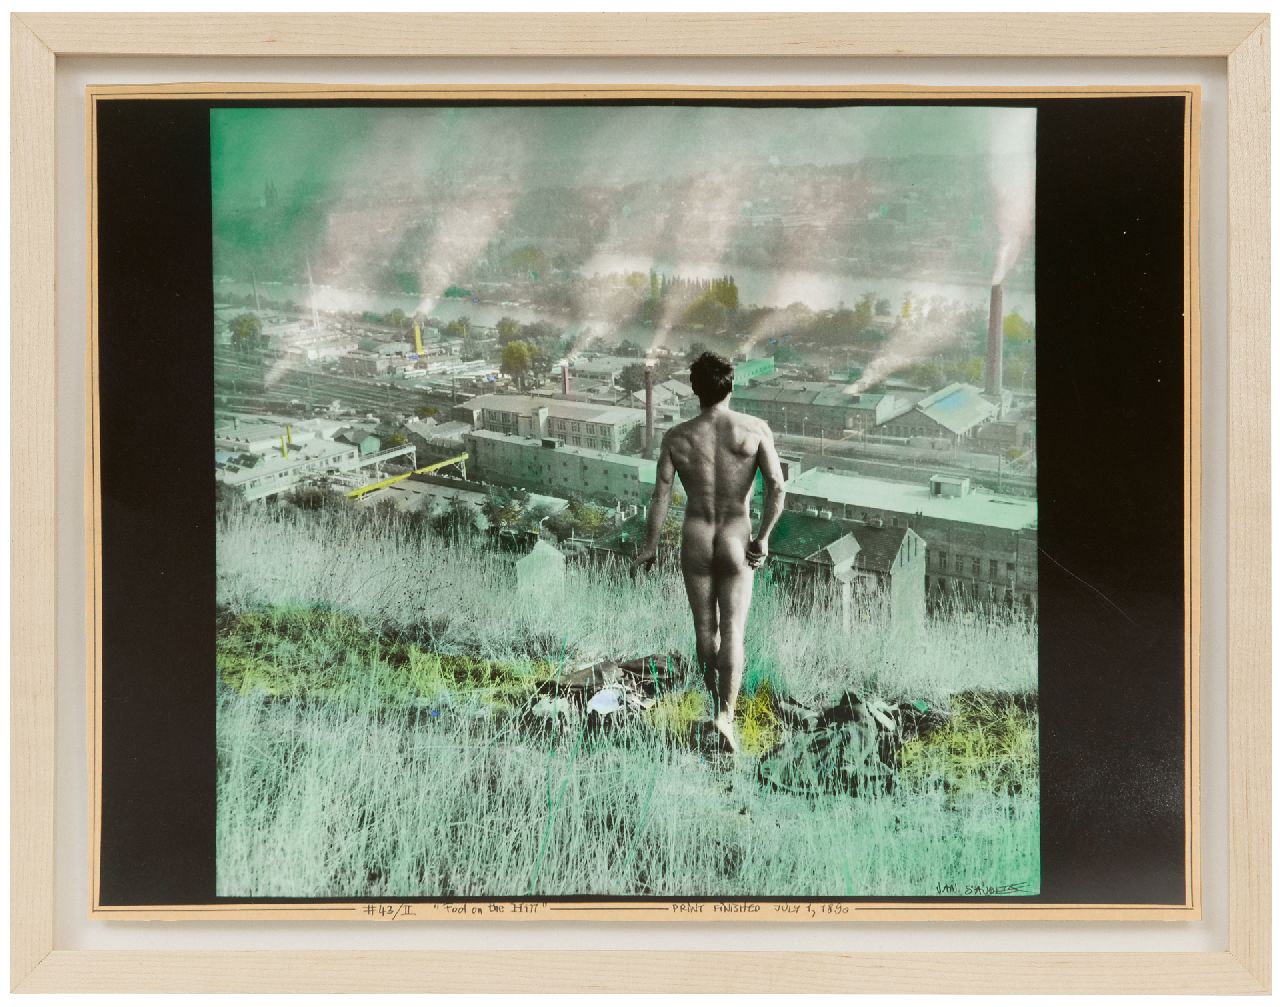 Saudek J.  | Jan Saudek | Prints and Multiples offered for sale | Fool on the hill, photo, silver gelatin print, hand colored 29.6 x 39.8 cm, signed l.r. and executed ca 1984